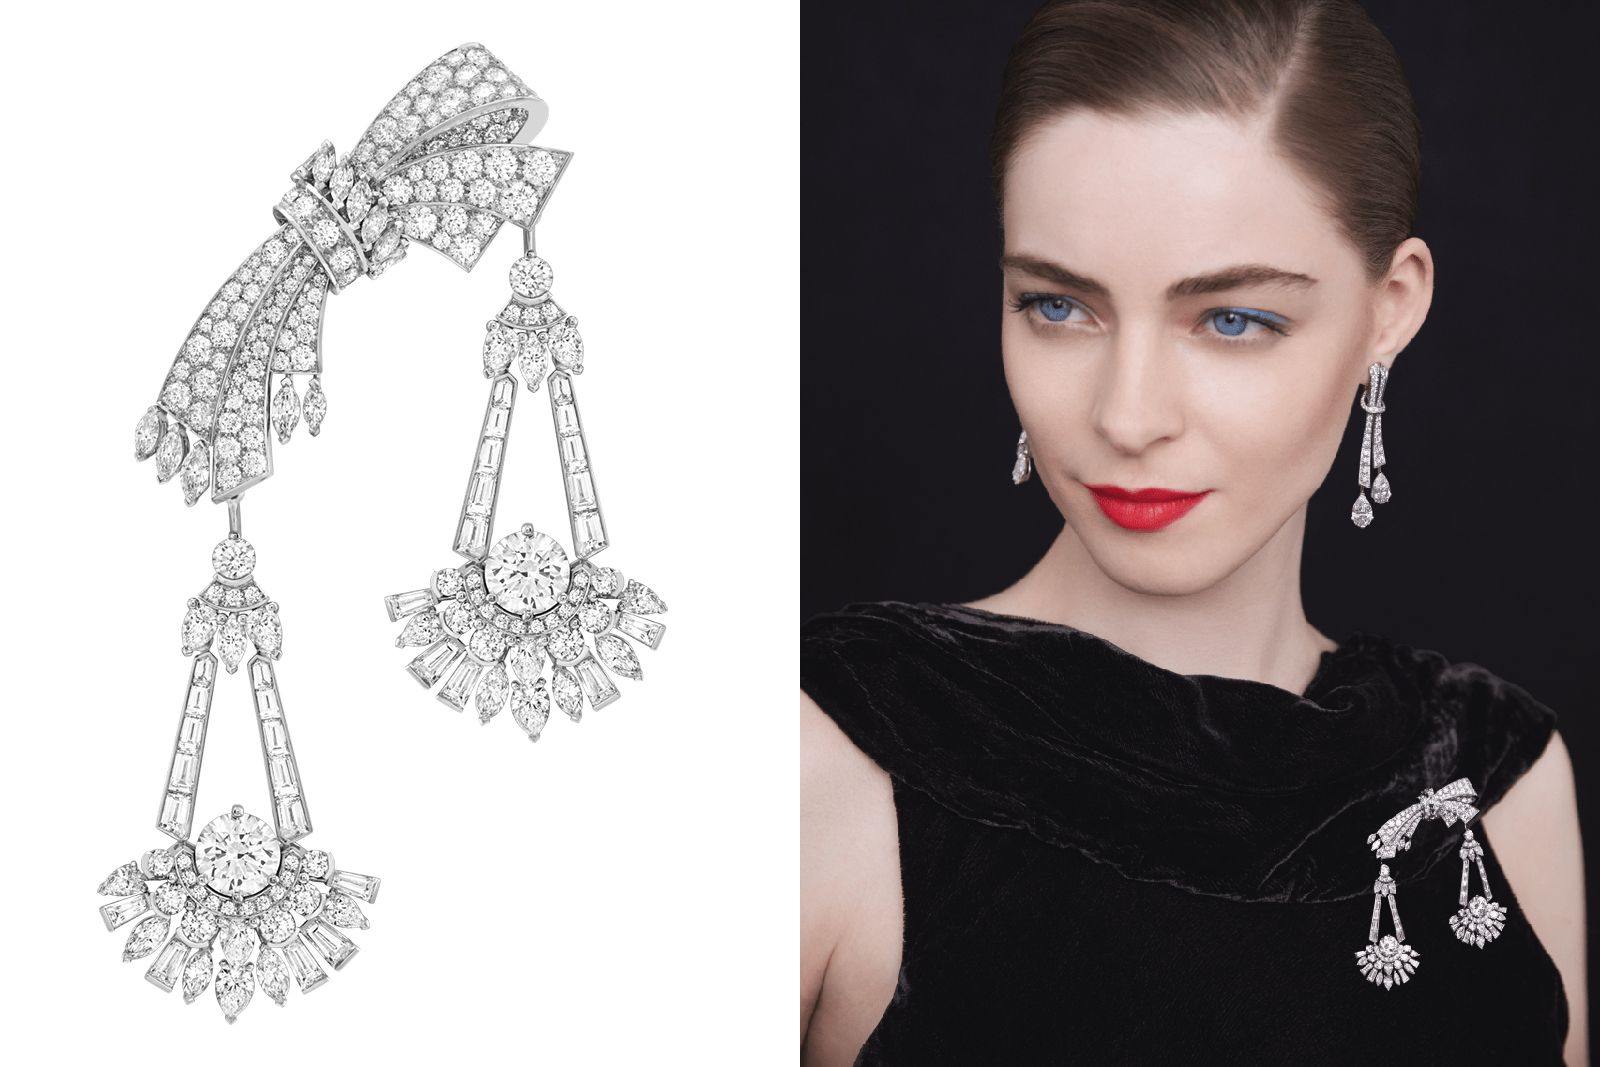 Van Cleef & Arpels diamond transformable Chandelier earrings and brooch and Dear Liz earrings from the Legend of Diamonds Chapter II High Jewellery collection